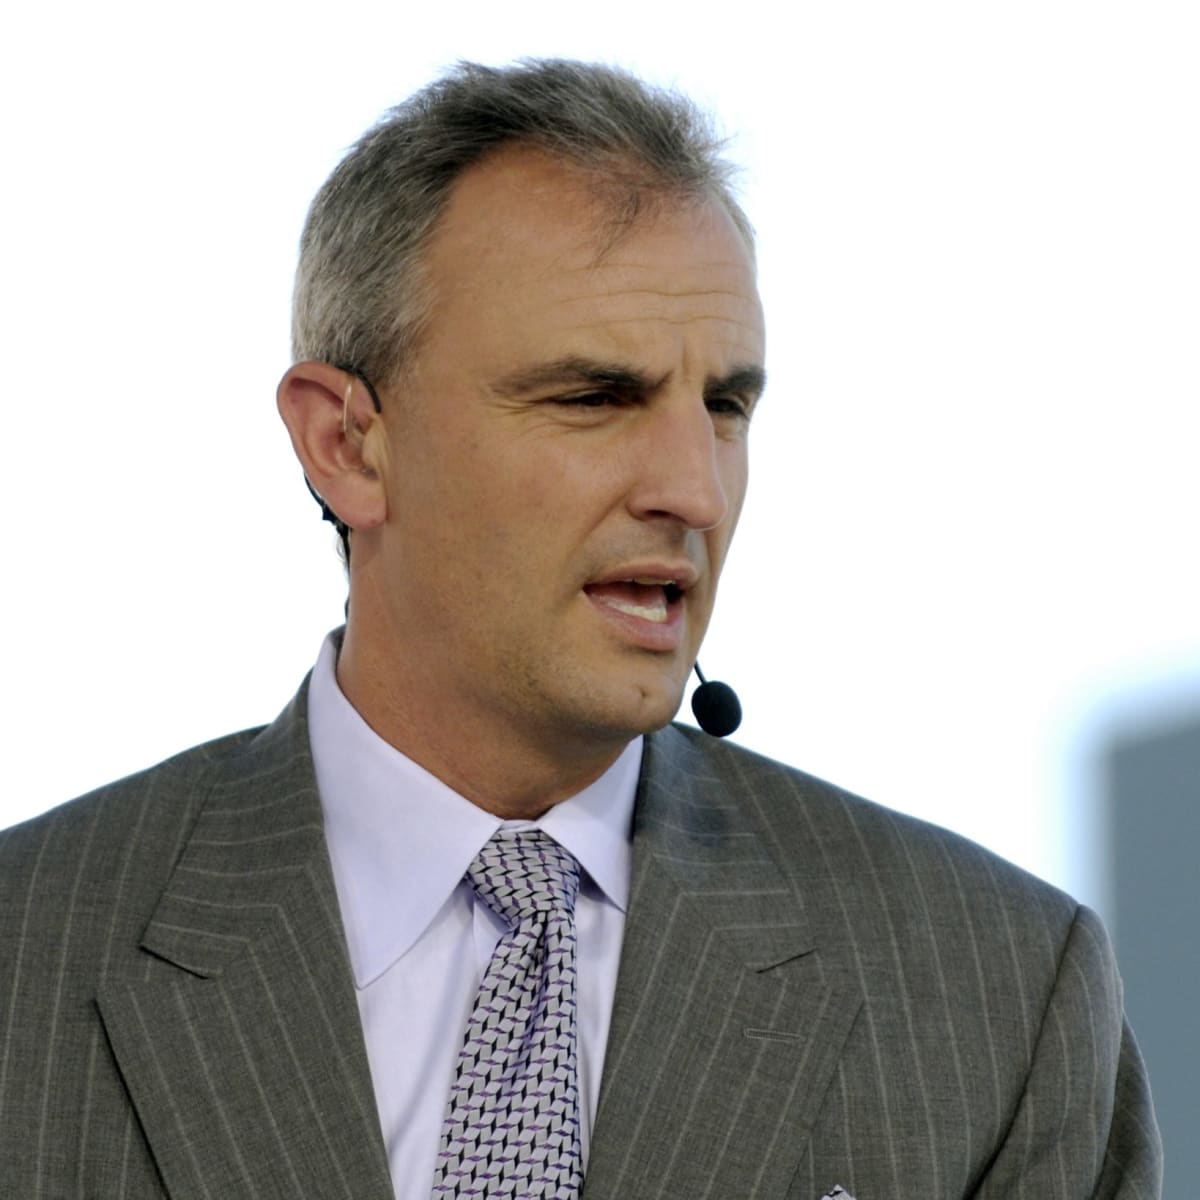 Trey Wingo will host NFL Draft coverage, but for Fox Sports